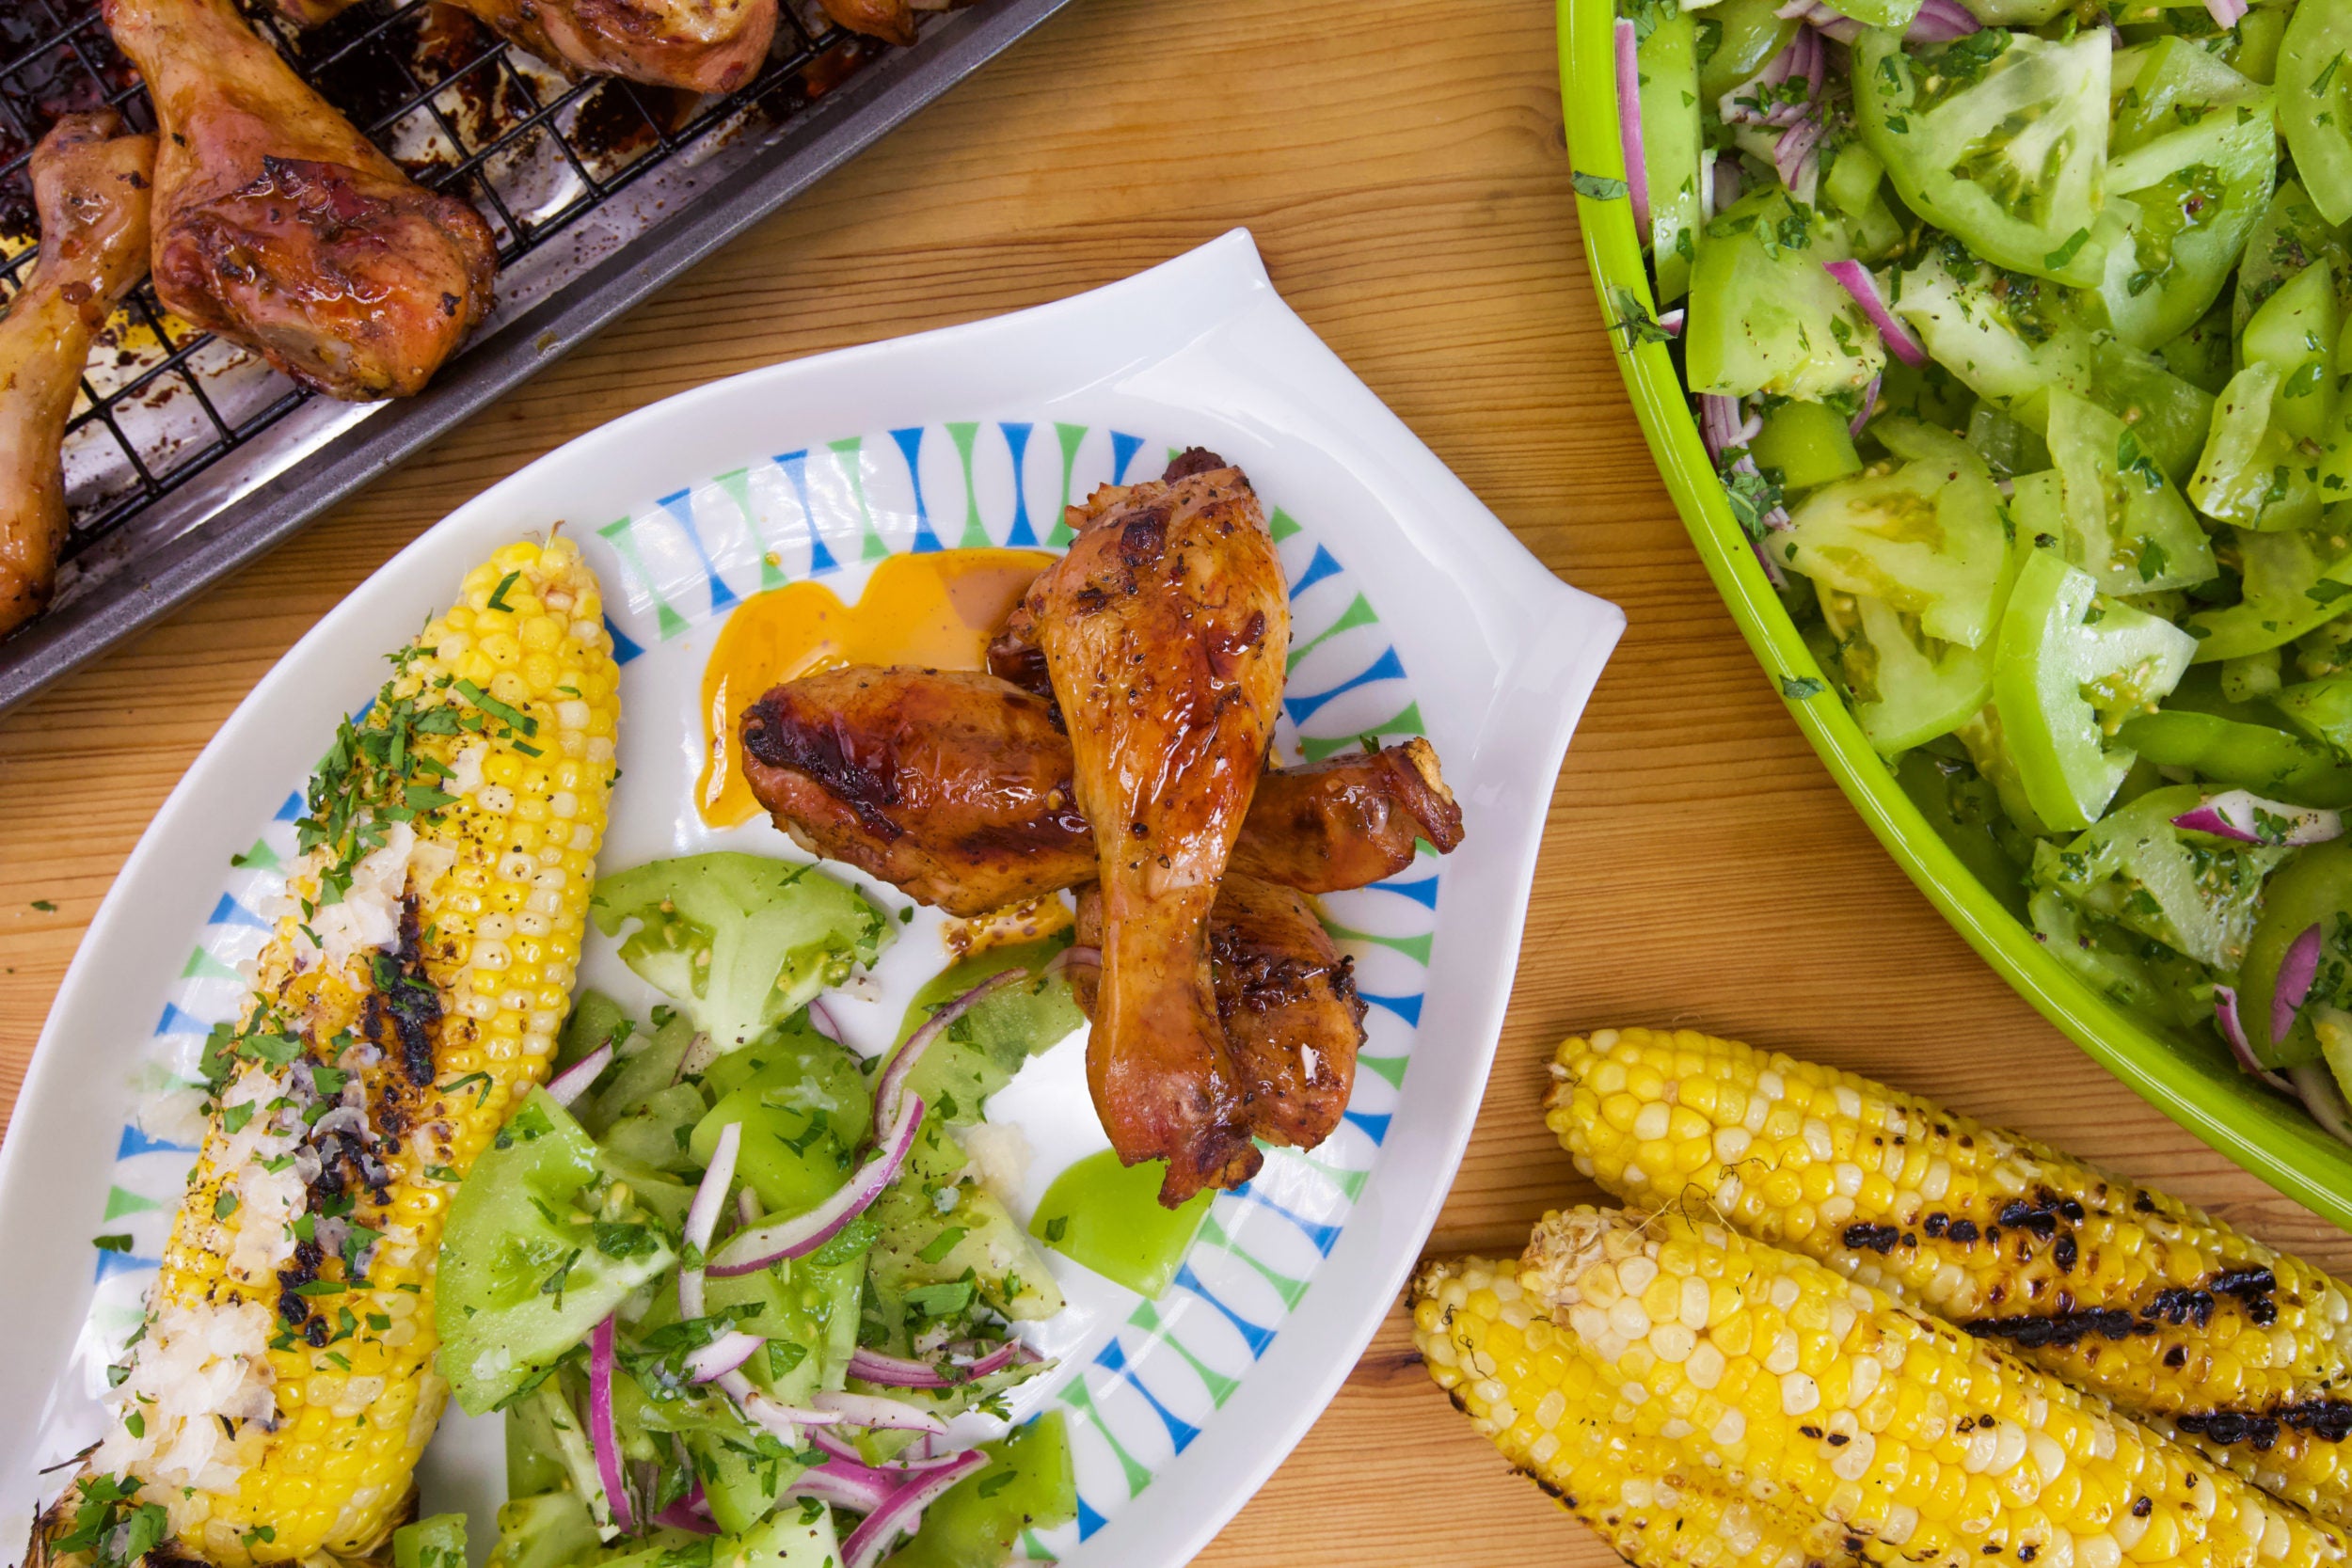 Rachael's Balsamic-Marinated Chicken Legs, Green Tomato Salad and Corn with Garlic Butter